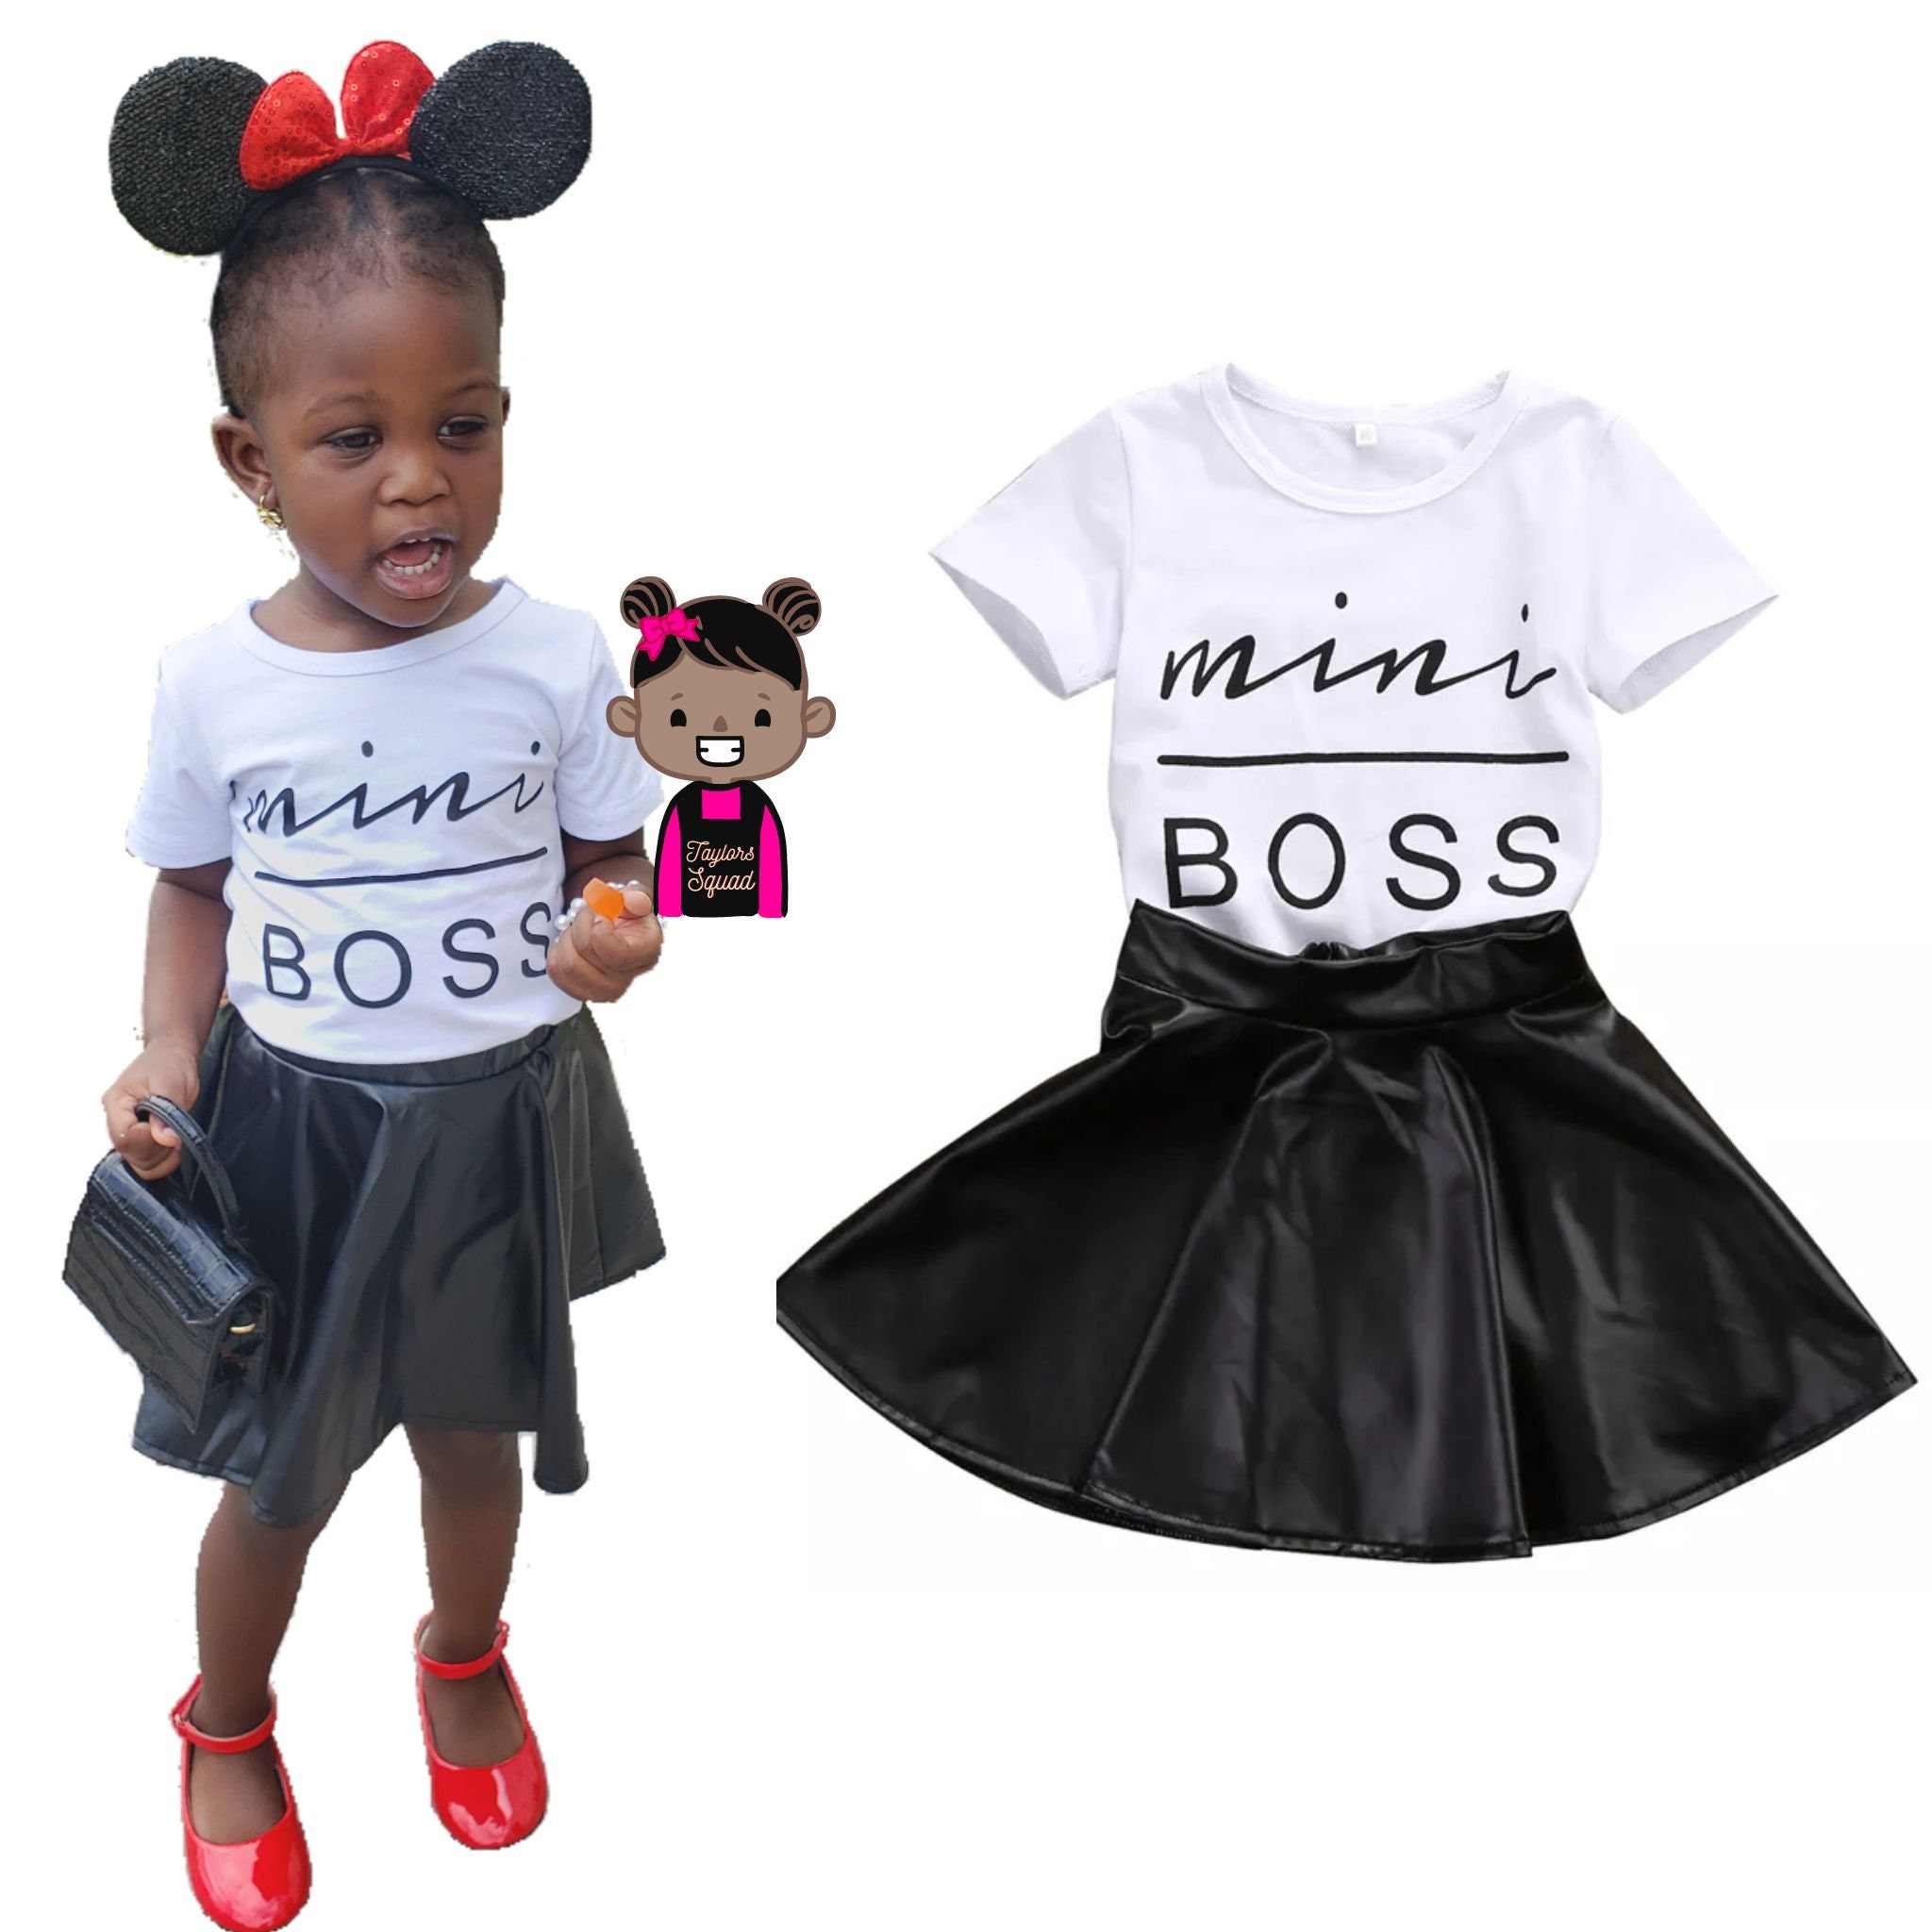 Mini Boss Outfit - Etsy